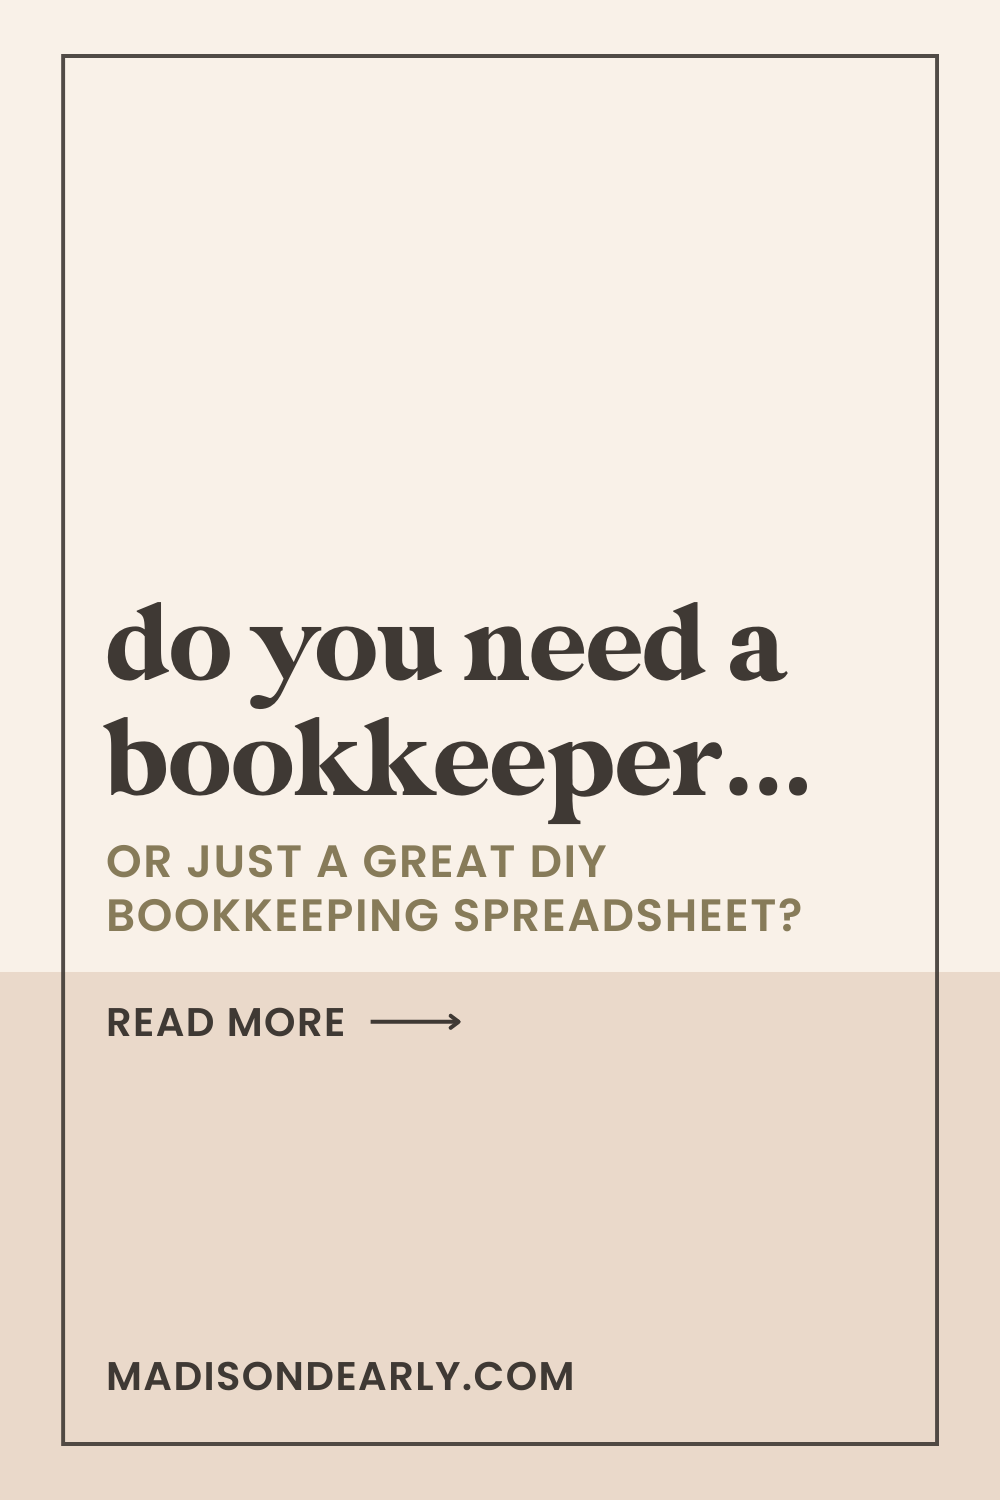 do you need a bookkeeper...or just a great diy bookkeeping spreadsheet? graphic